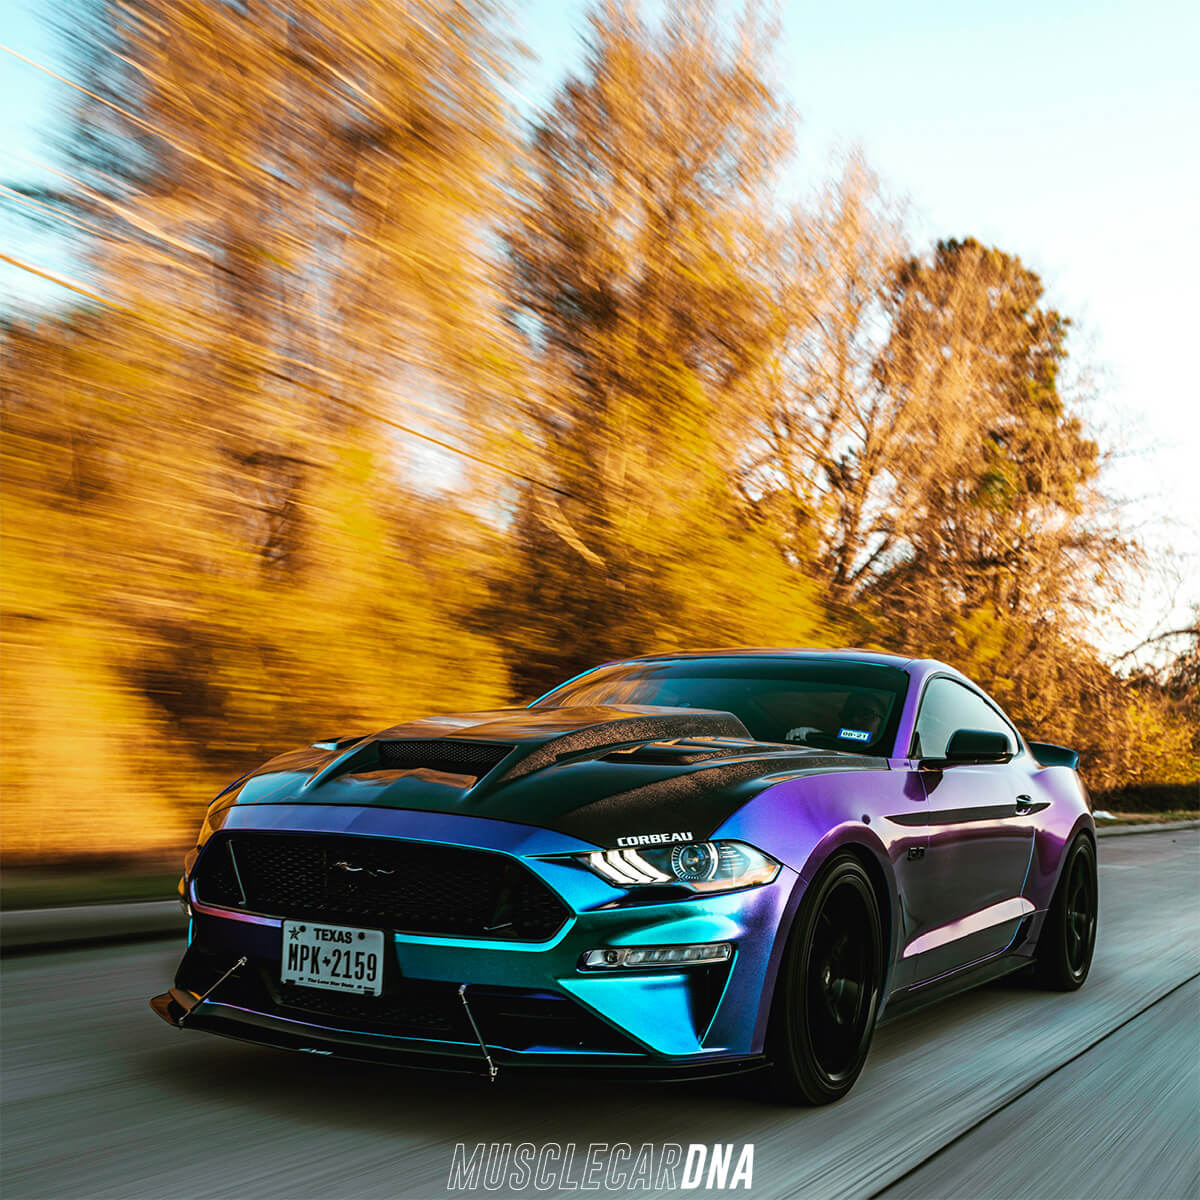 The Perfect Ford Mustang S550 Build - Bags, Exterior & Performance Mods